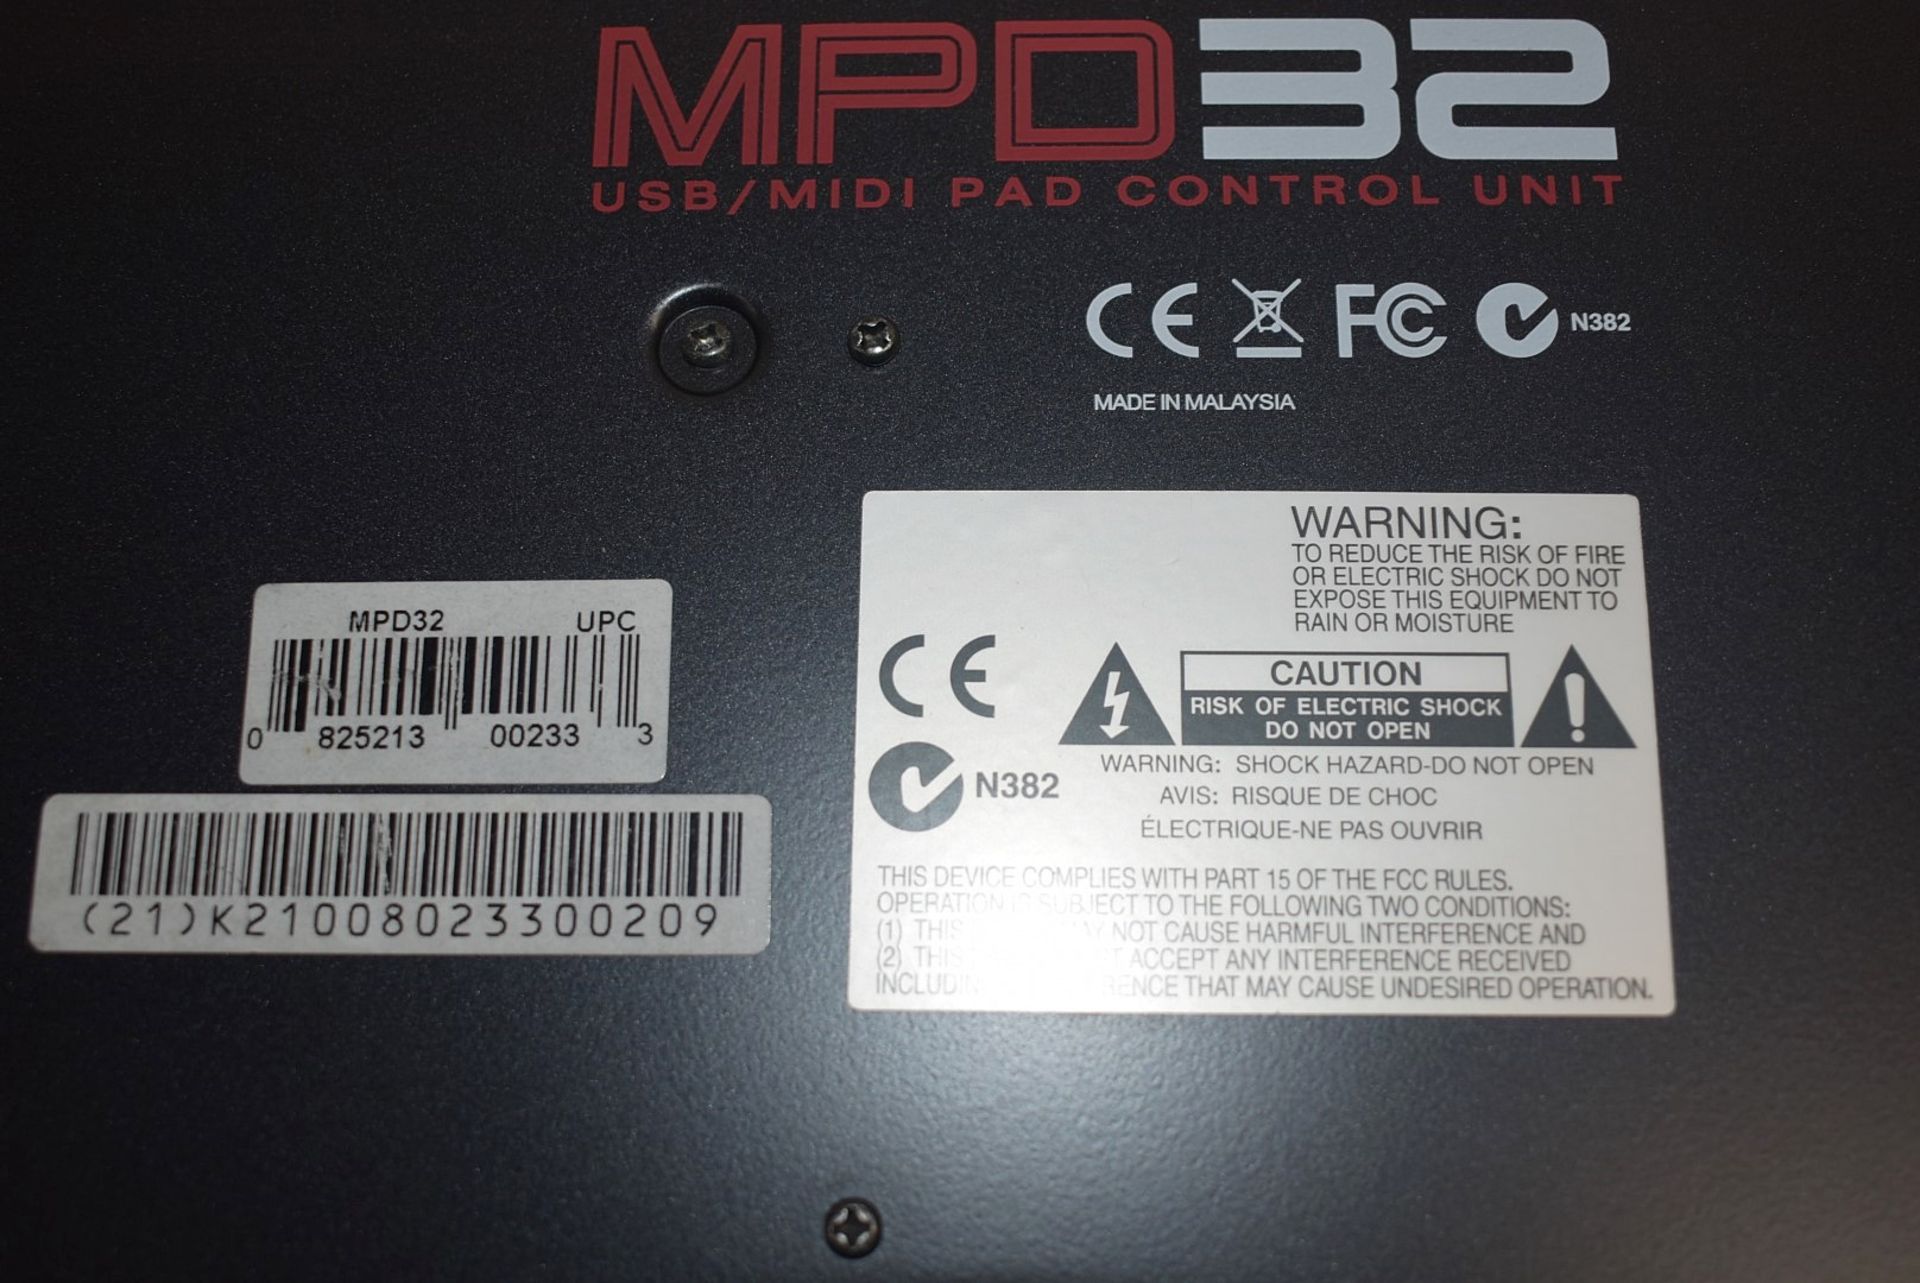 1 x AKAI Professional MPD32 USB/Midi MPC Pad Controller, Musicians and DJs - Ref: DS7606 ALT WH2 - - Image 5 of 10